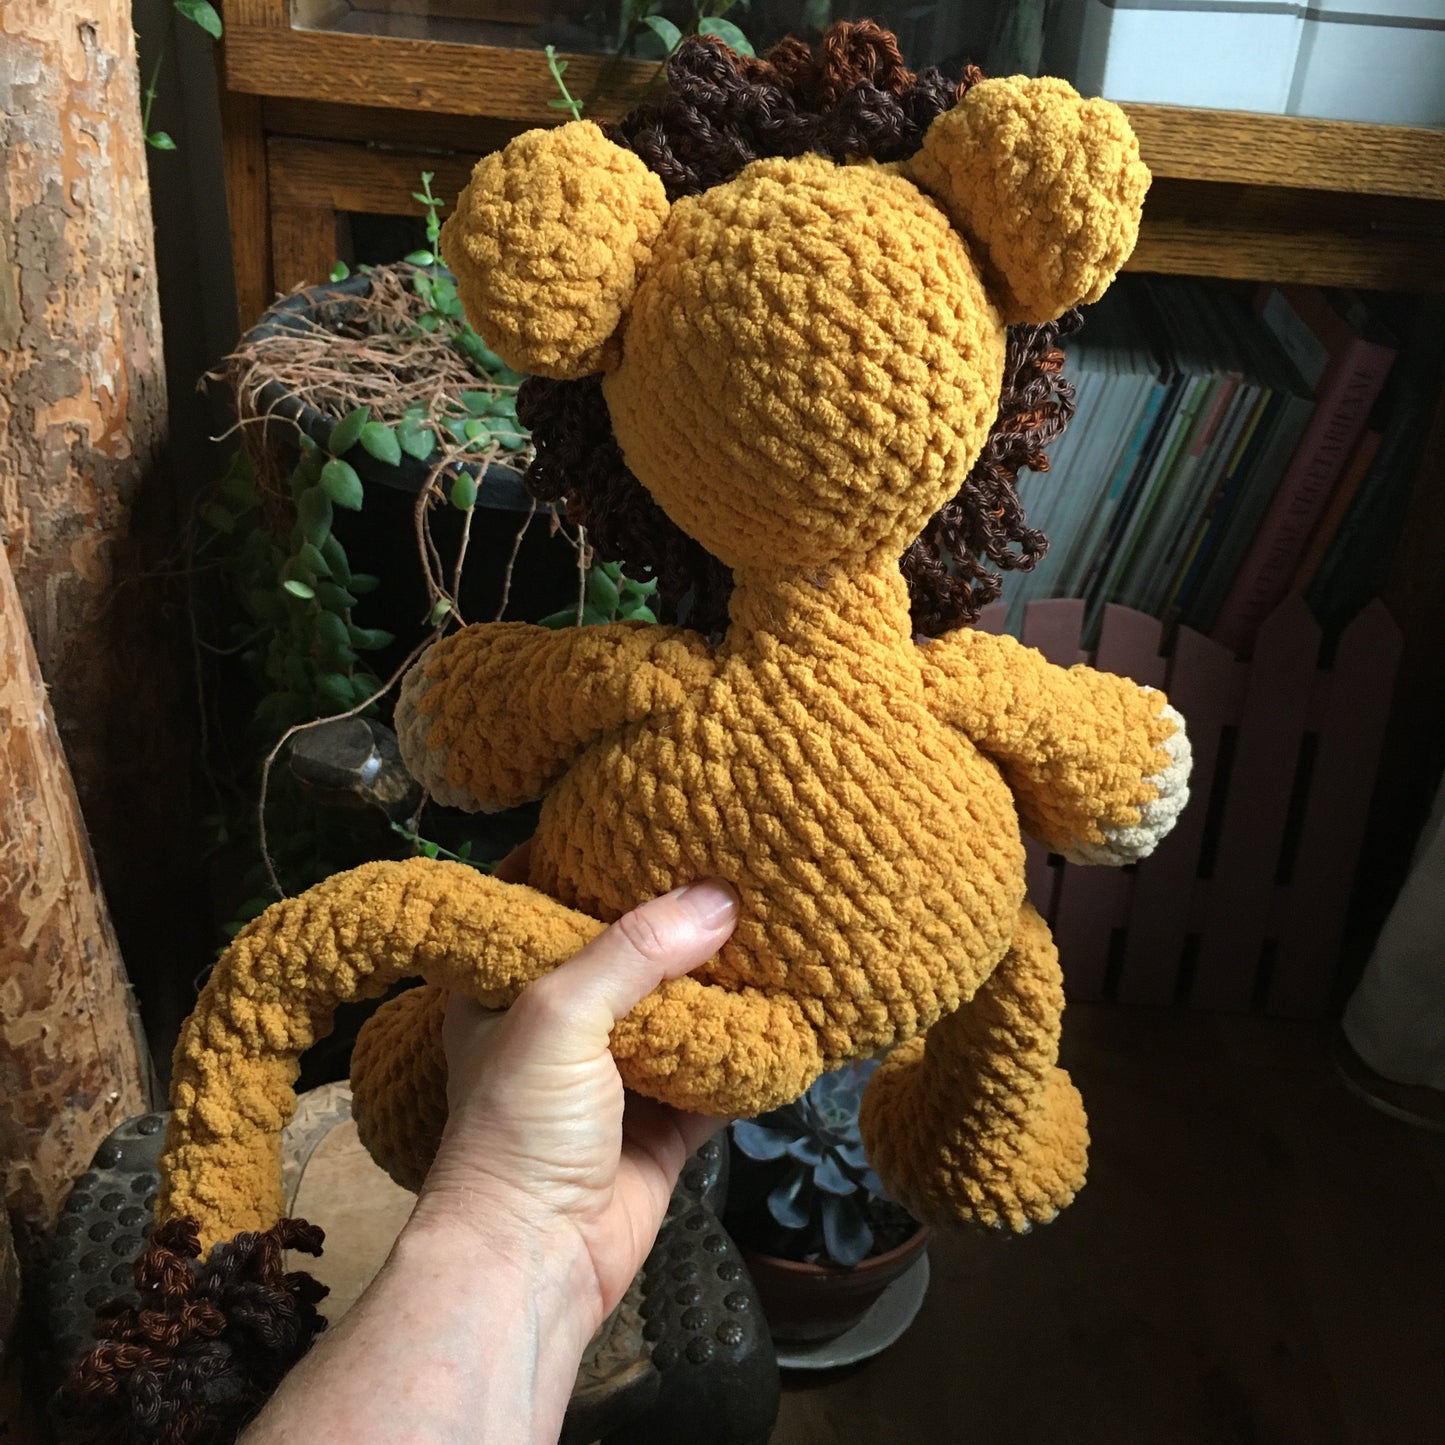 THE LION KING LEON - with Big belly, can be personalized in born plushies